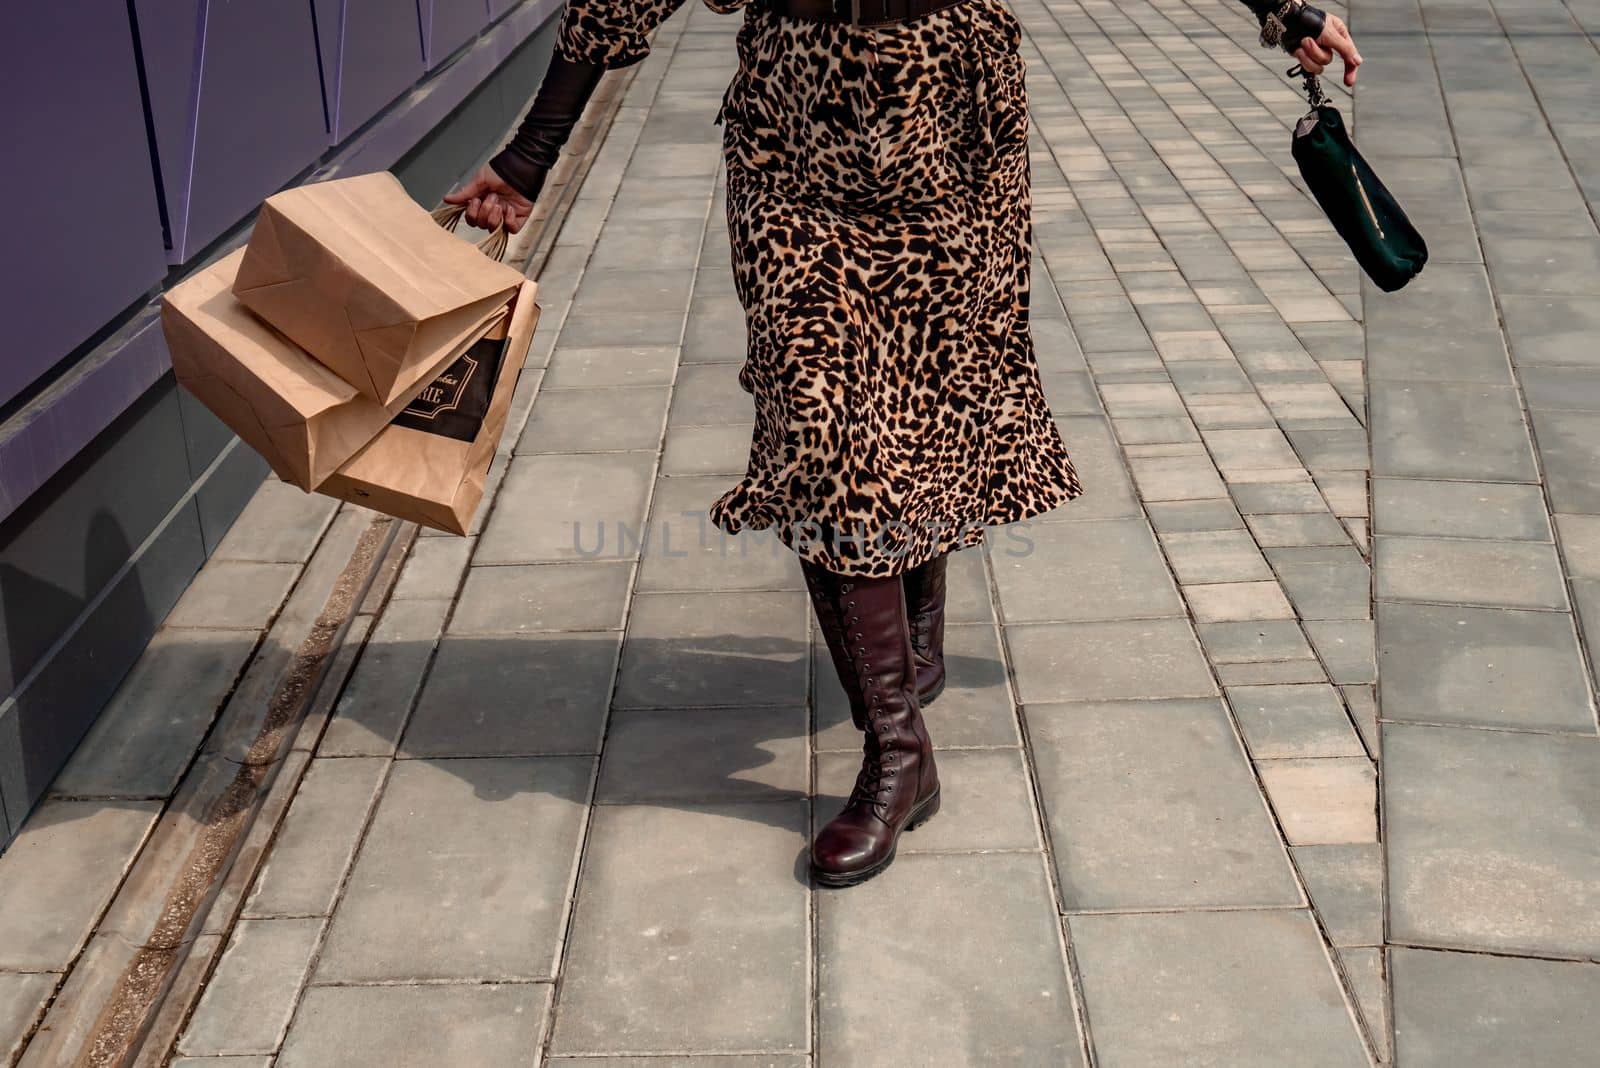 A happy shopaholic girl keeps her bags near the shopping center. A woman near the store is happy with her purchases, holding bags. Dressed in a leopard print dress. Consumer concept